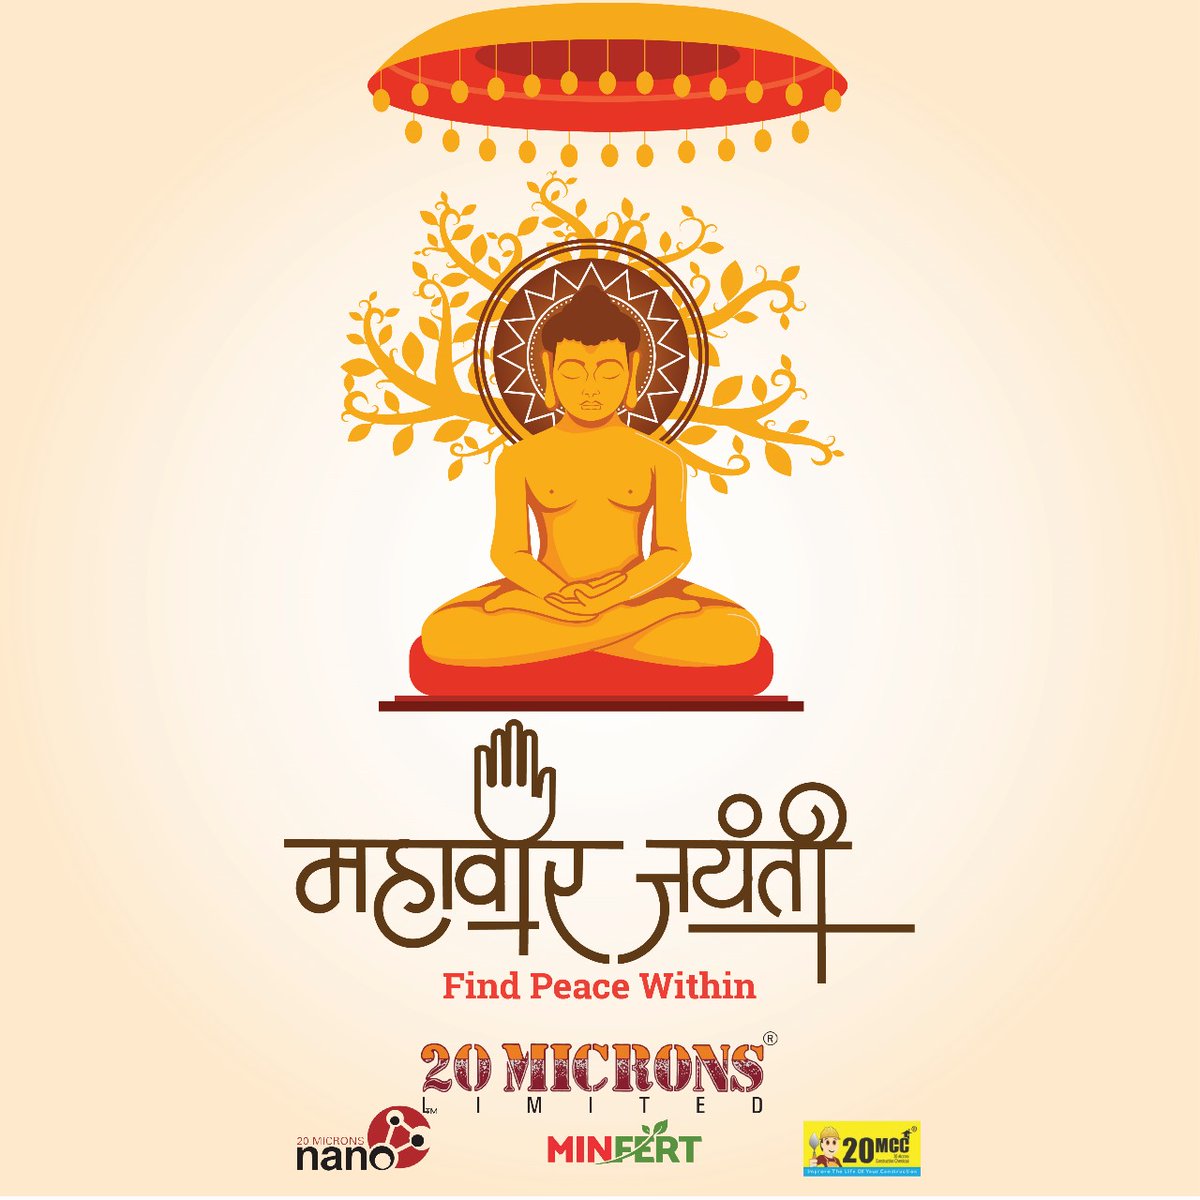 May Lord Mahavir's teachings inspire us all to embrace compassion and understanding in our everyday lives. Our team wishes a peaceful Mahavir Jayanti to all. #MahavirJayanti #HappyMahavirJayanti #MahavirJayantiGreetings #MahavirJayantiWishes #AuspiciousDay #Truth #Knowledge